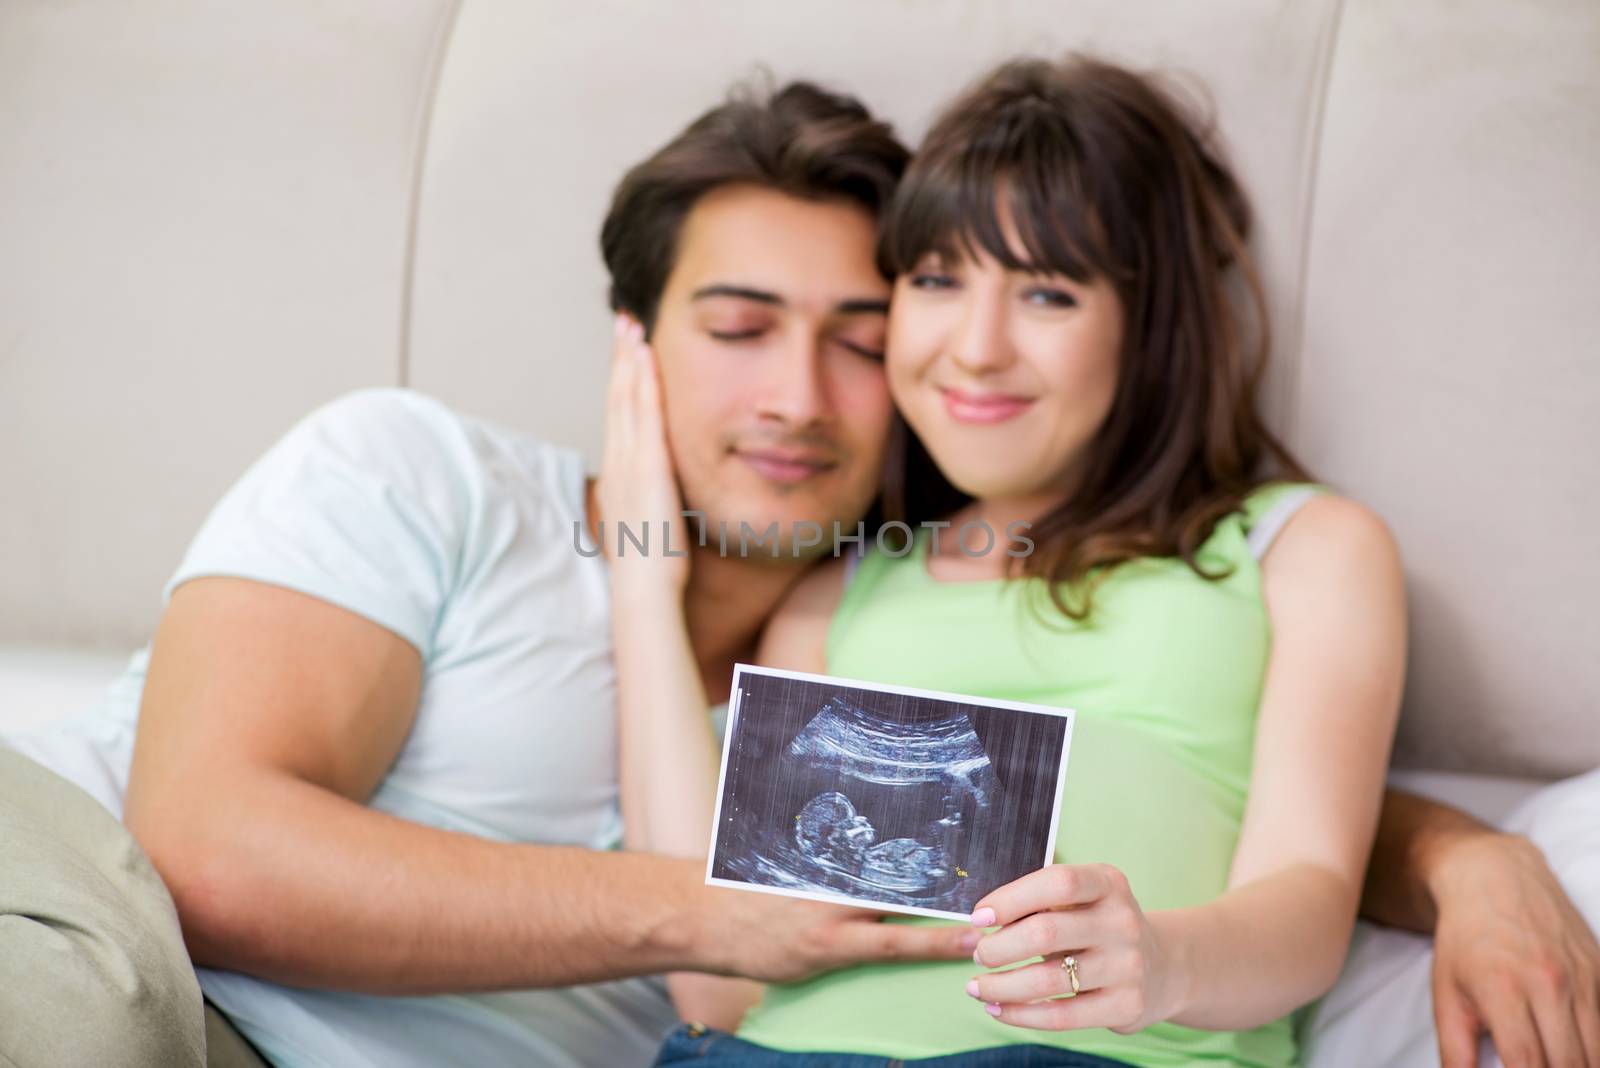 Young family finding out about pregnancy by Elnur